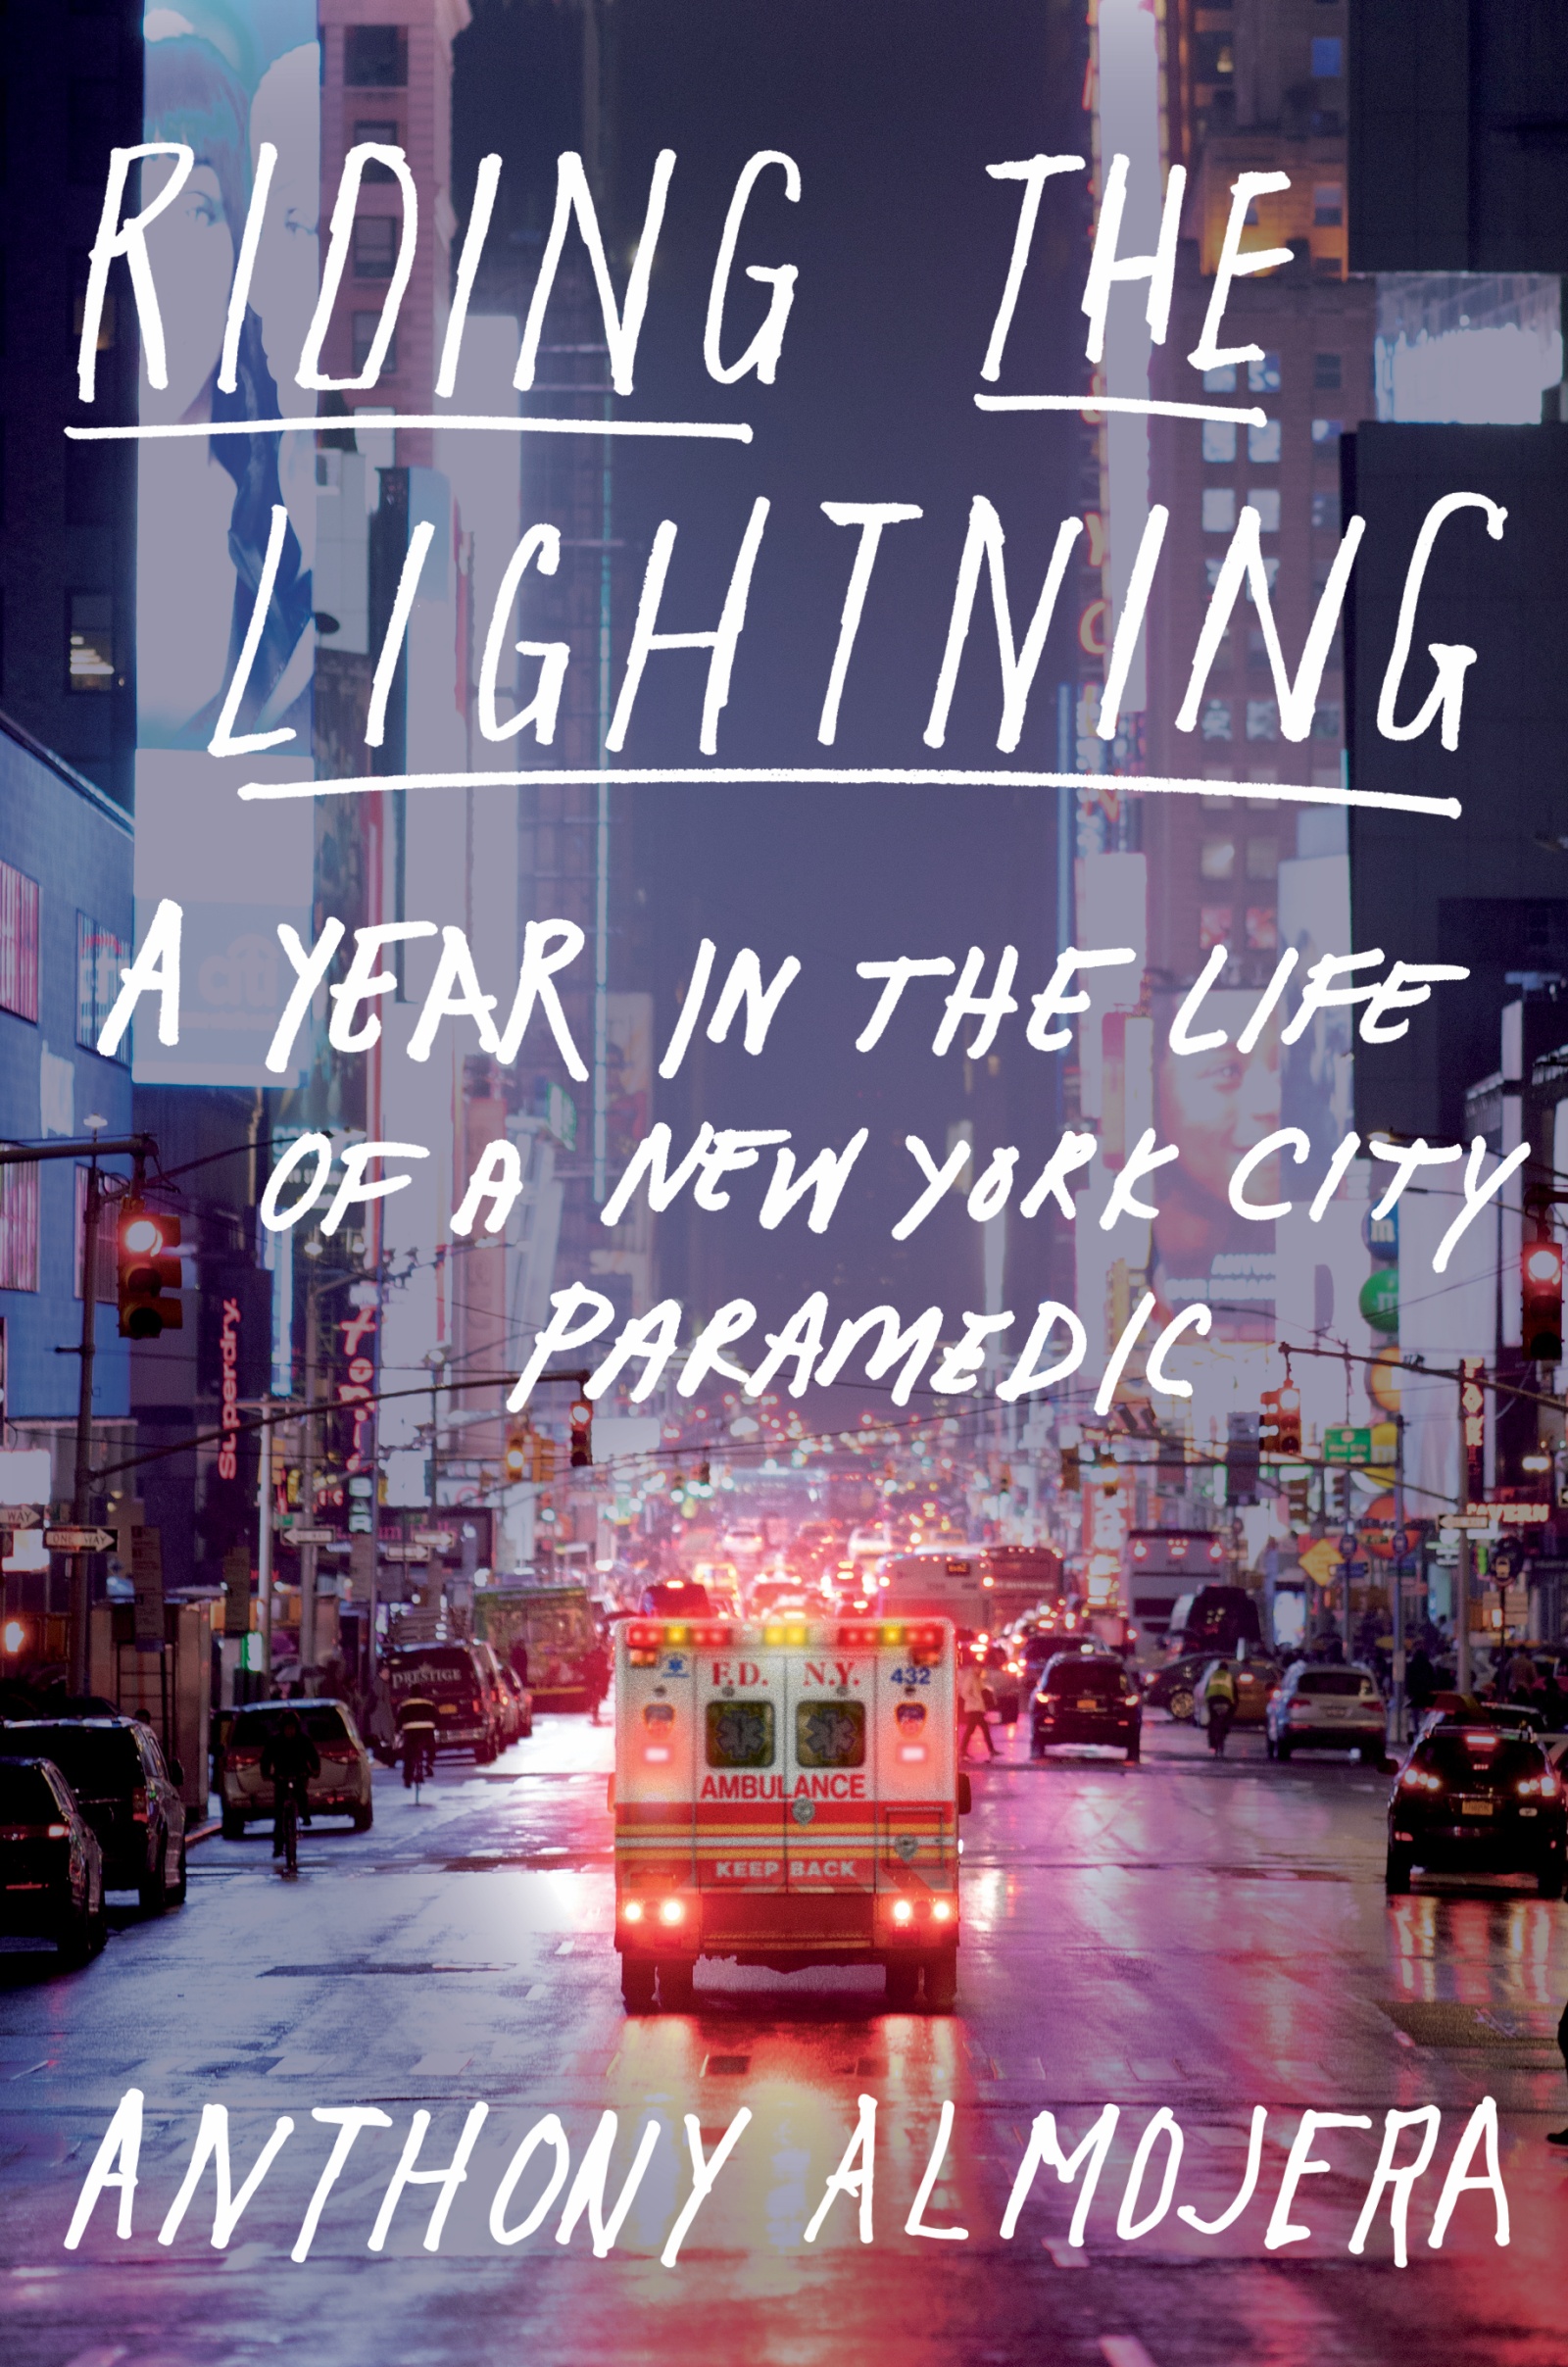 Riding the Lightning A Year in the Life of a New York City Paramedic